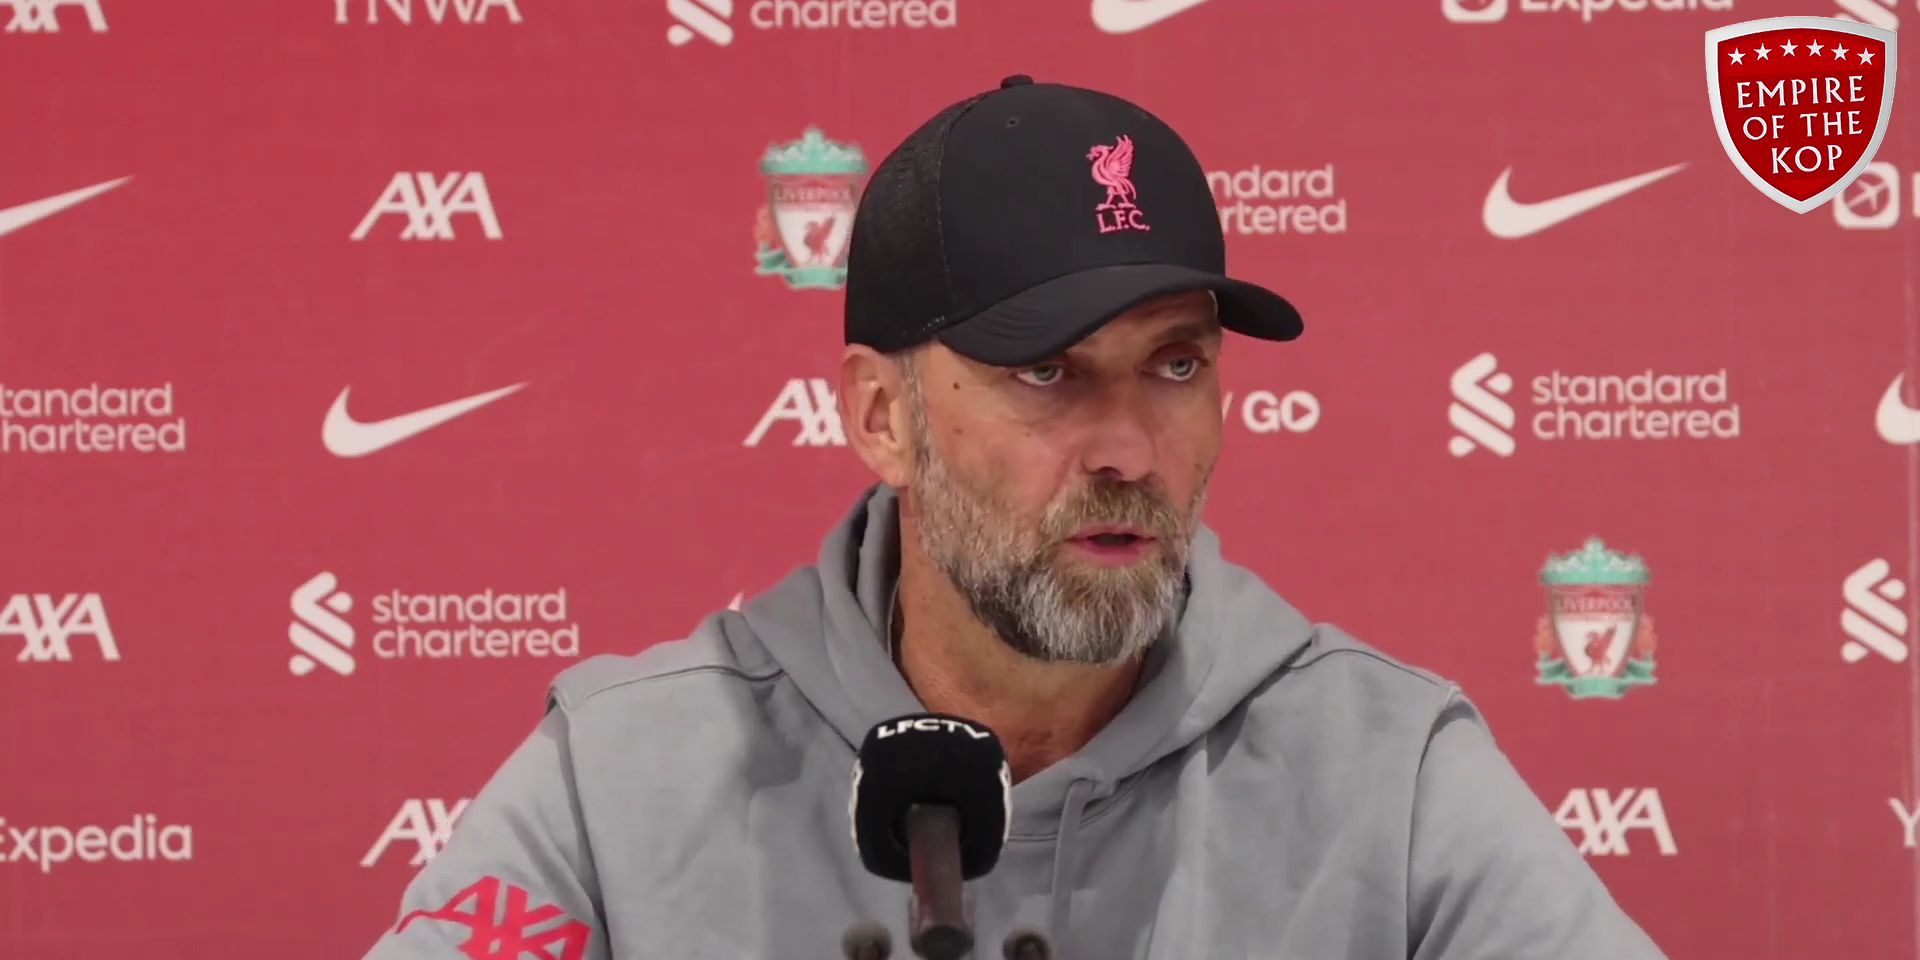 (Video) “Of course” – Klopp reveals second positional shift within his team after dramatic Forest win